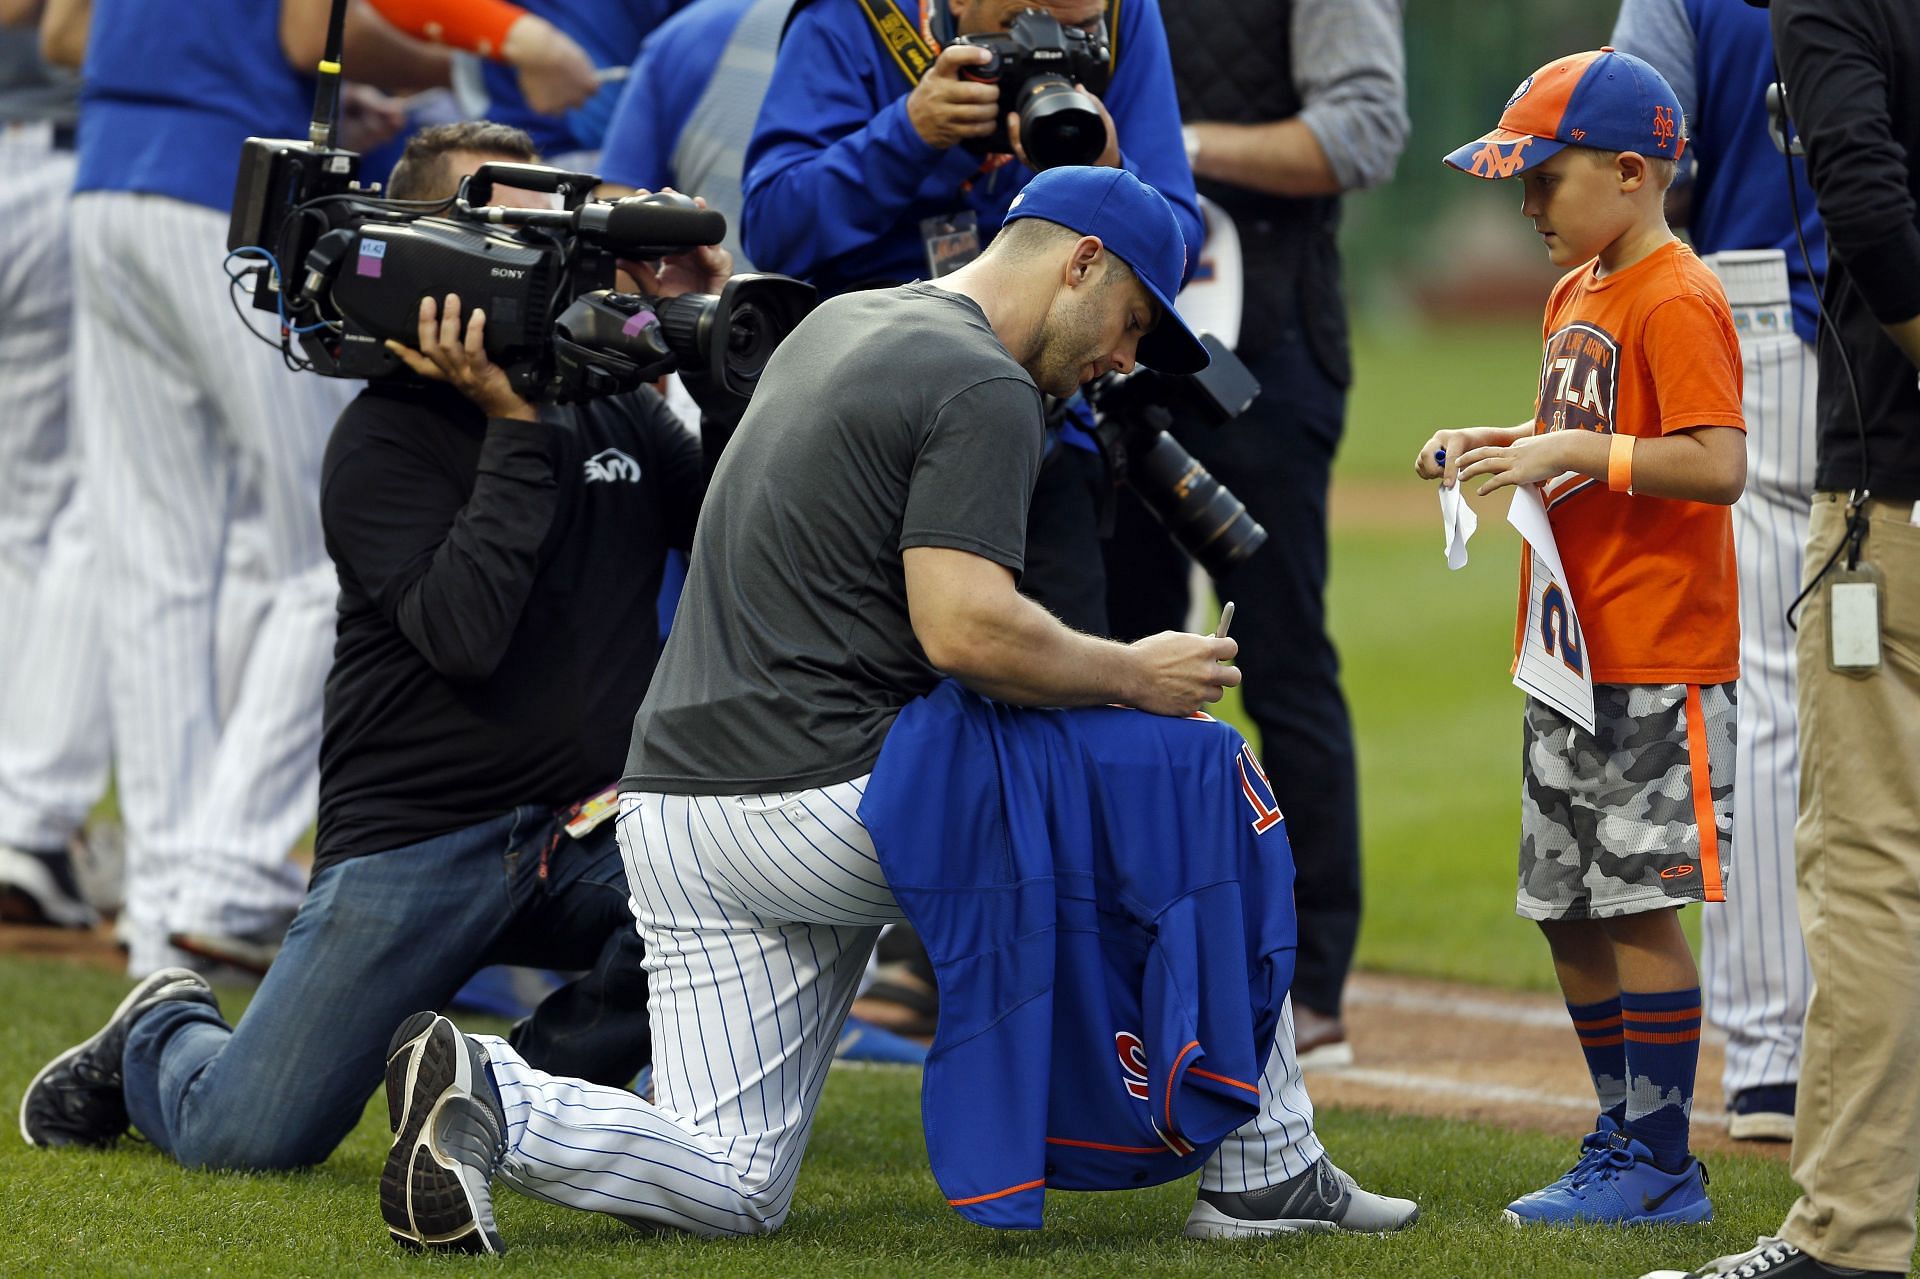 David Wright to play one last game